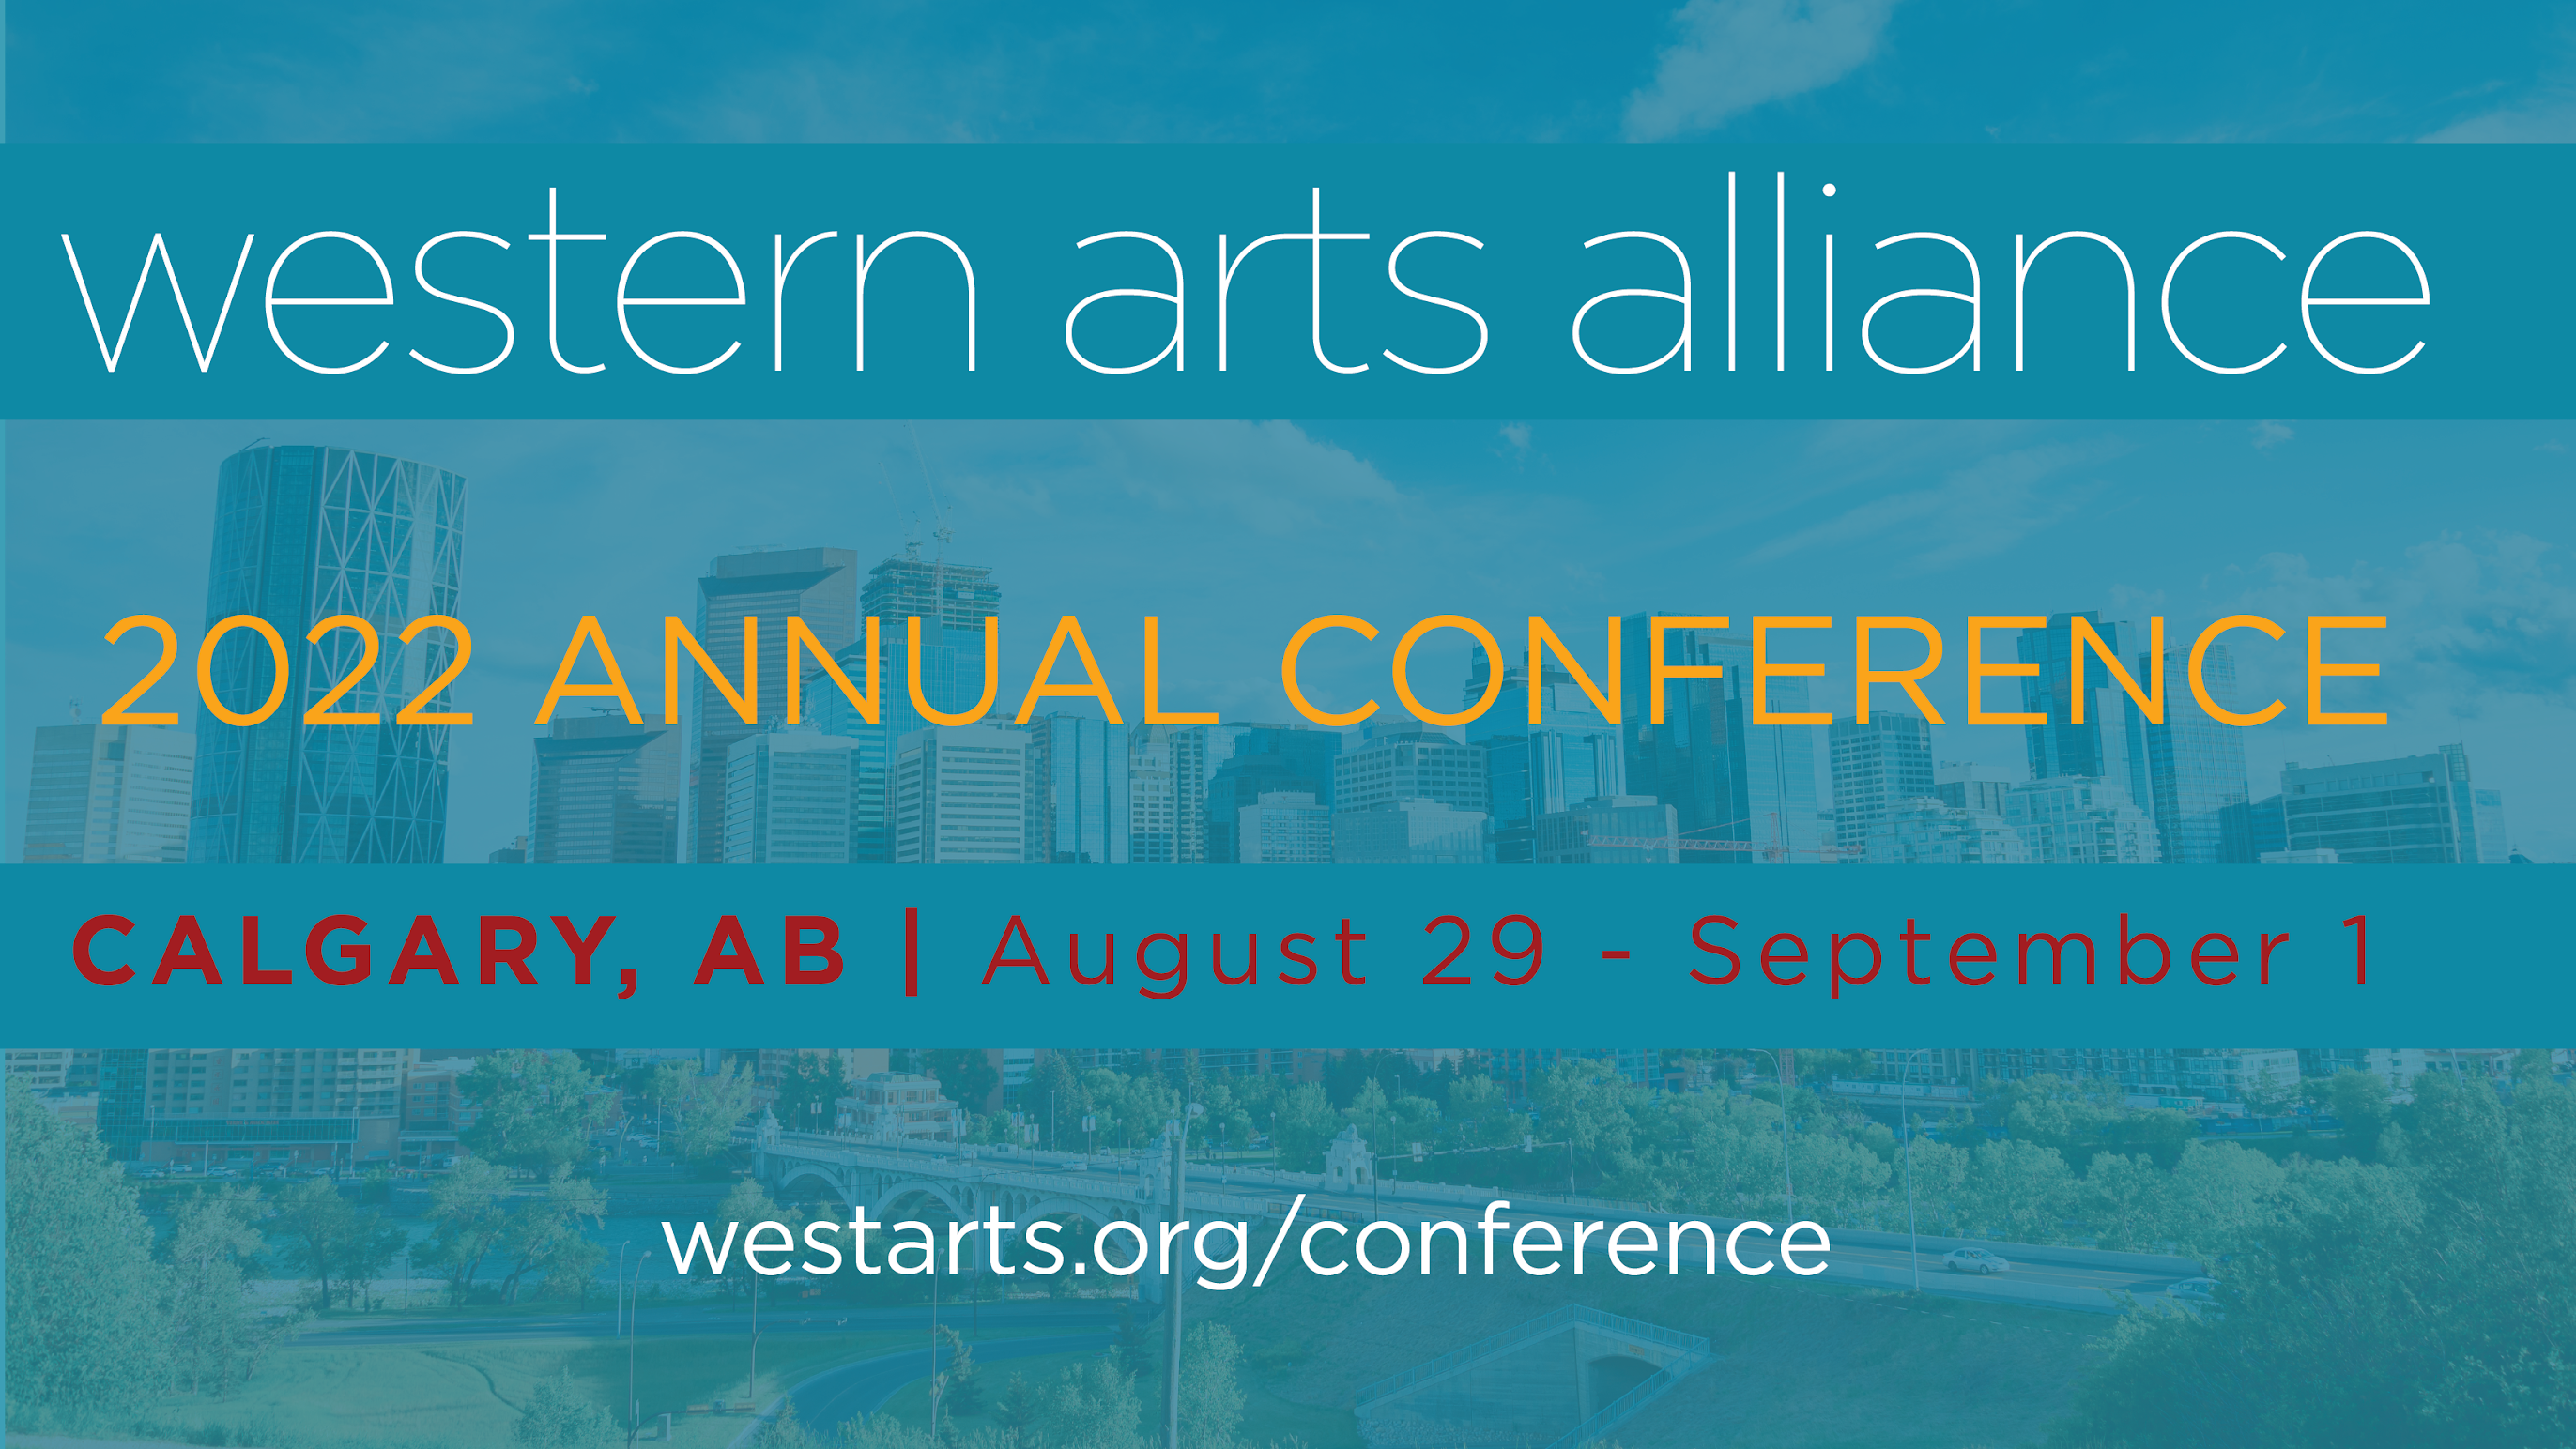 Photo of the Calgary skyline in the background, with "western arts alliance, 2022 annual conference, Calgary, AB, August 29 to September 1" written in the foreground